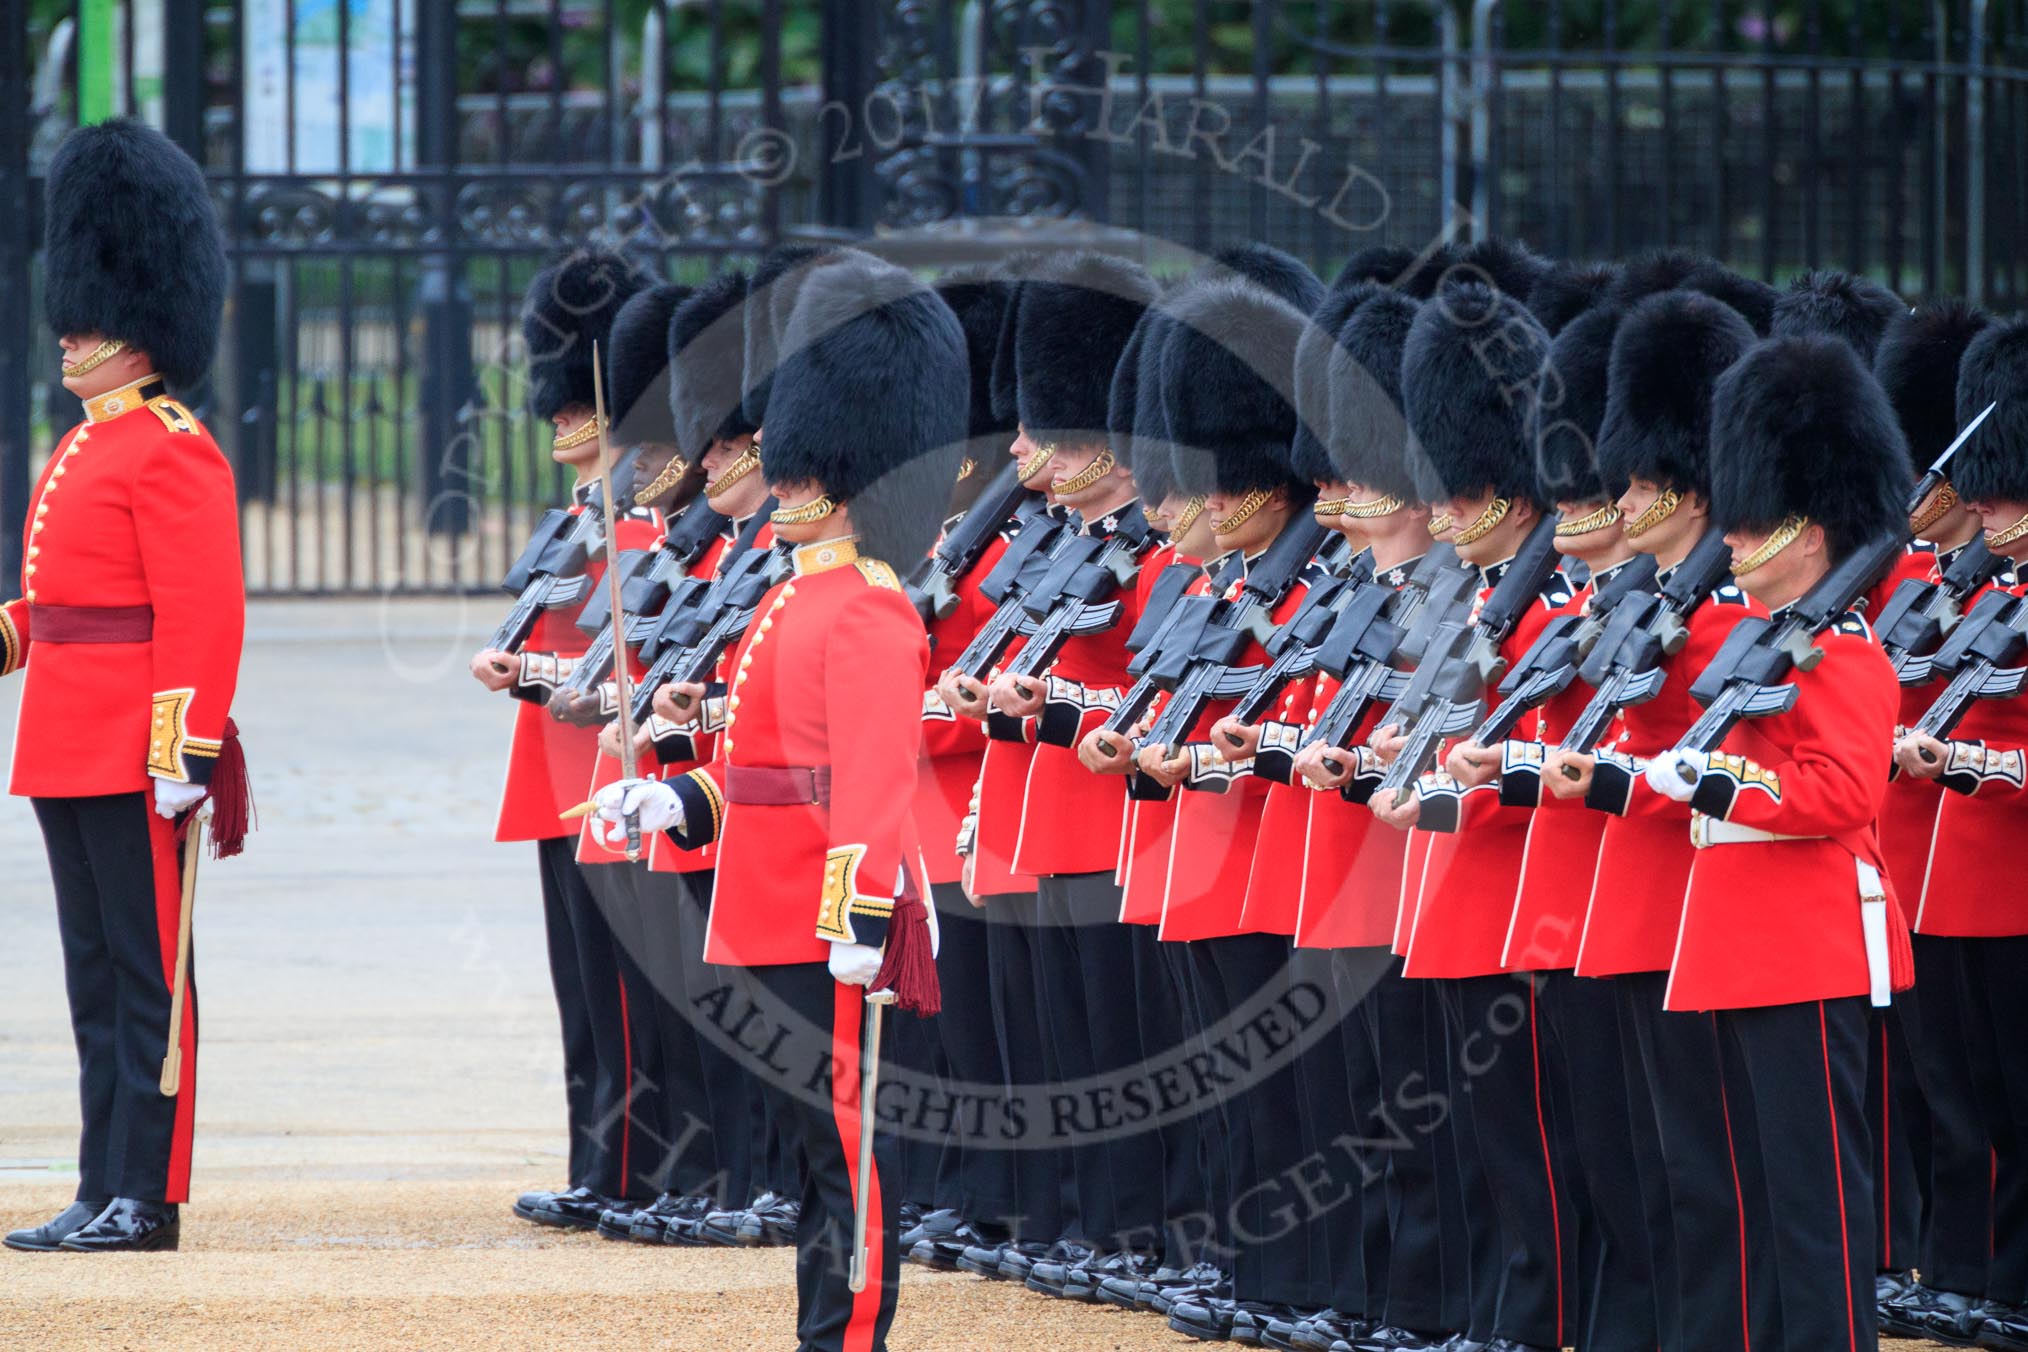 during The Colonel's Review {iptcyear4} (final rehearsal for Trooping the Colour, The Queen's Birthday Parade)  at Horse Guards Parade, Westminster, London, 2 June 2018, 10:45.